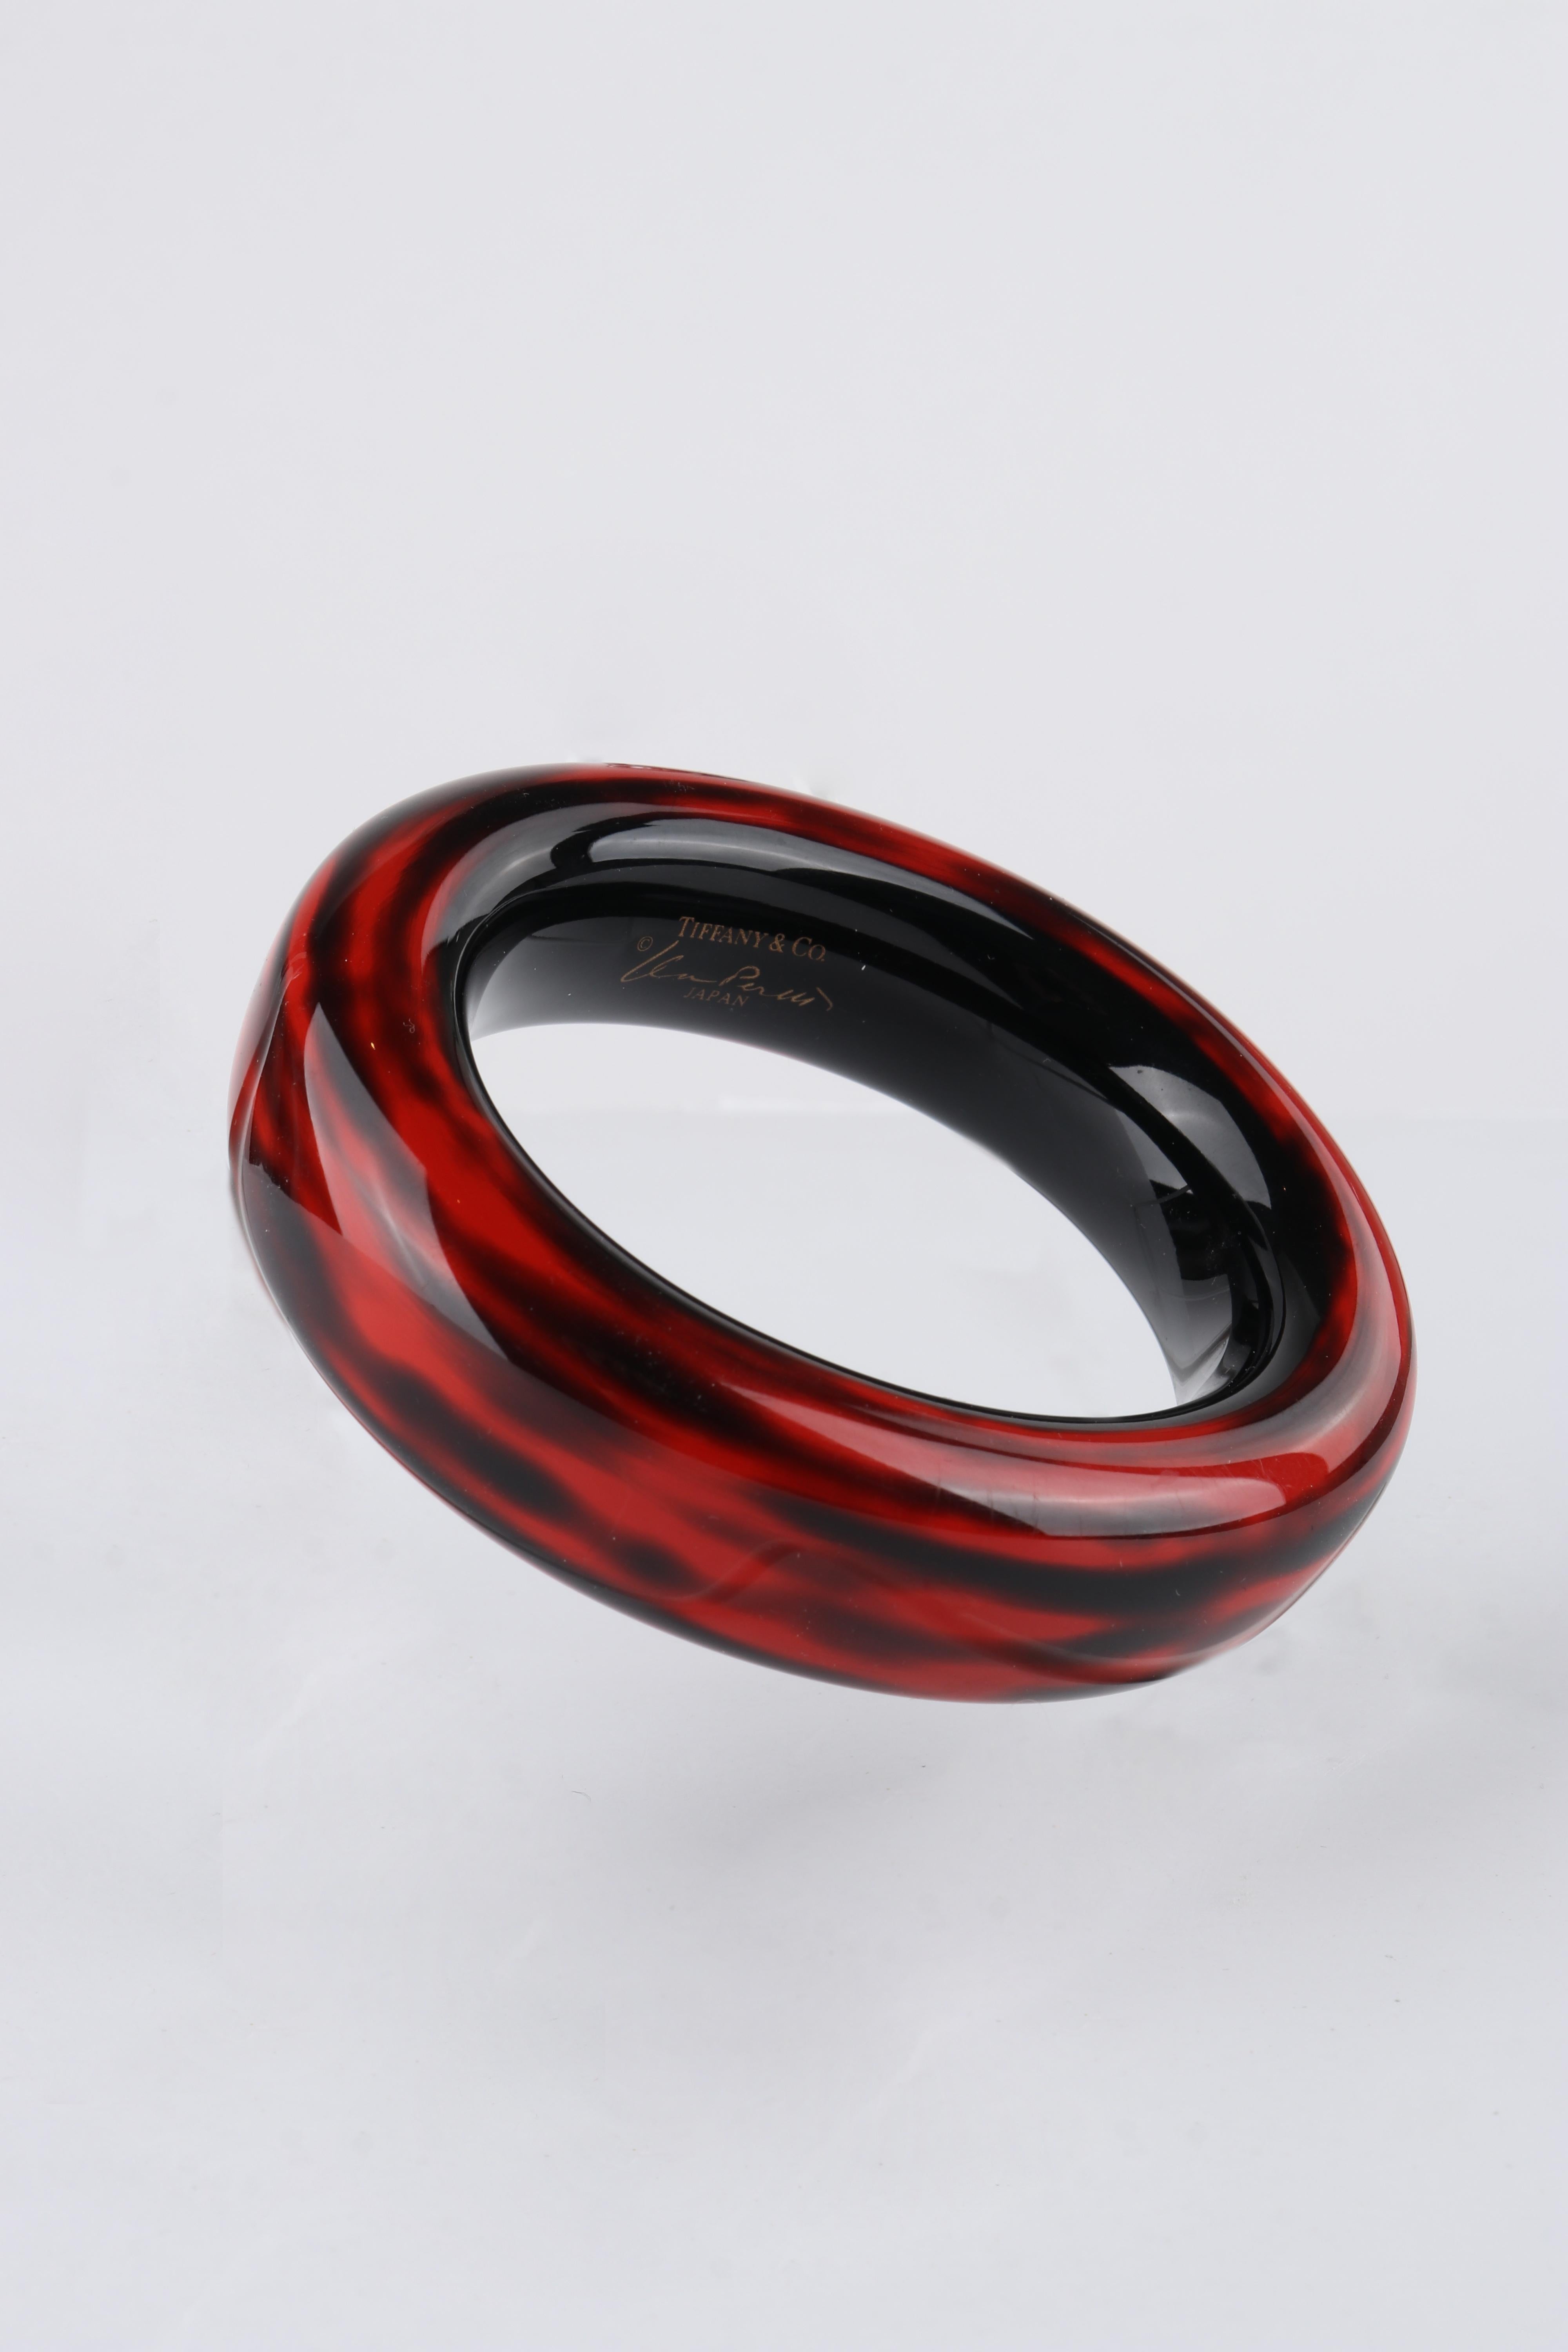 TIFFANY & CO. ELSA PERETTI Black Red Polished Lacquer Hard Wood Bangle Bracelet

Brand / Manufacturer: Tiffany & Co.
Collection: Lacquer Jewelry
Designer: Elsa Peretti
Style: Bangle Bracelet
Color(s): Red and Black
Unmarked Material (feel of):